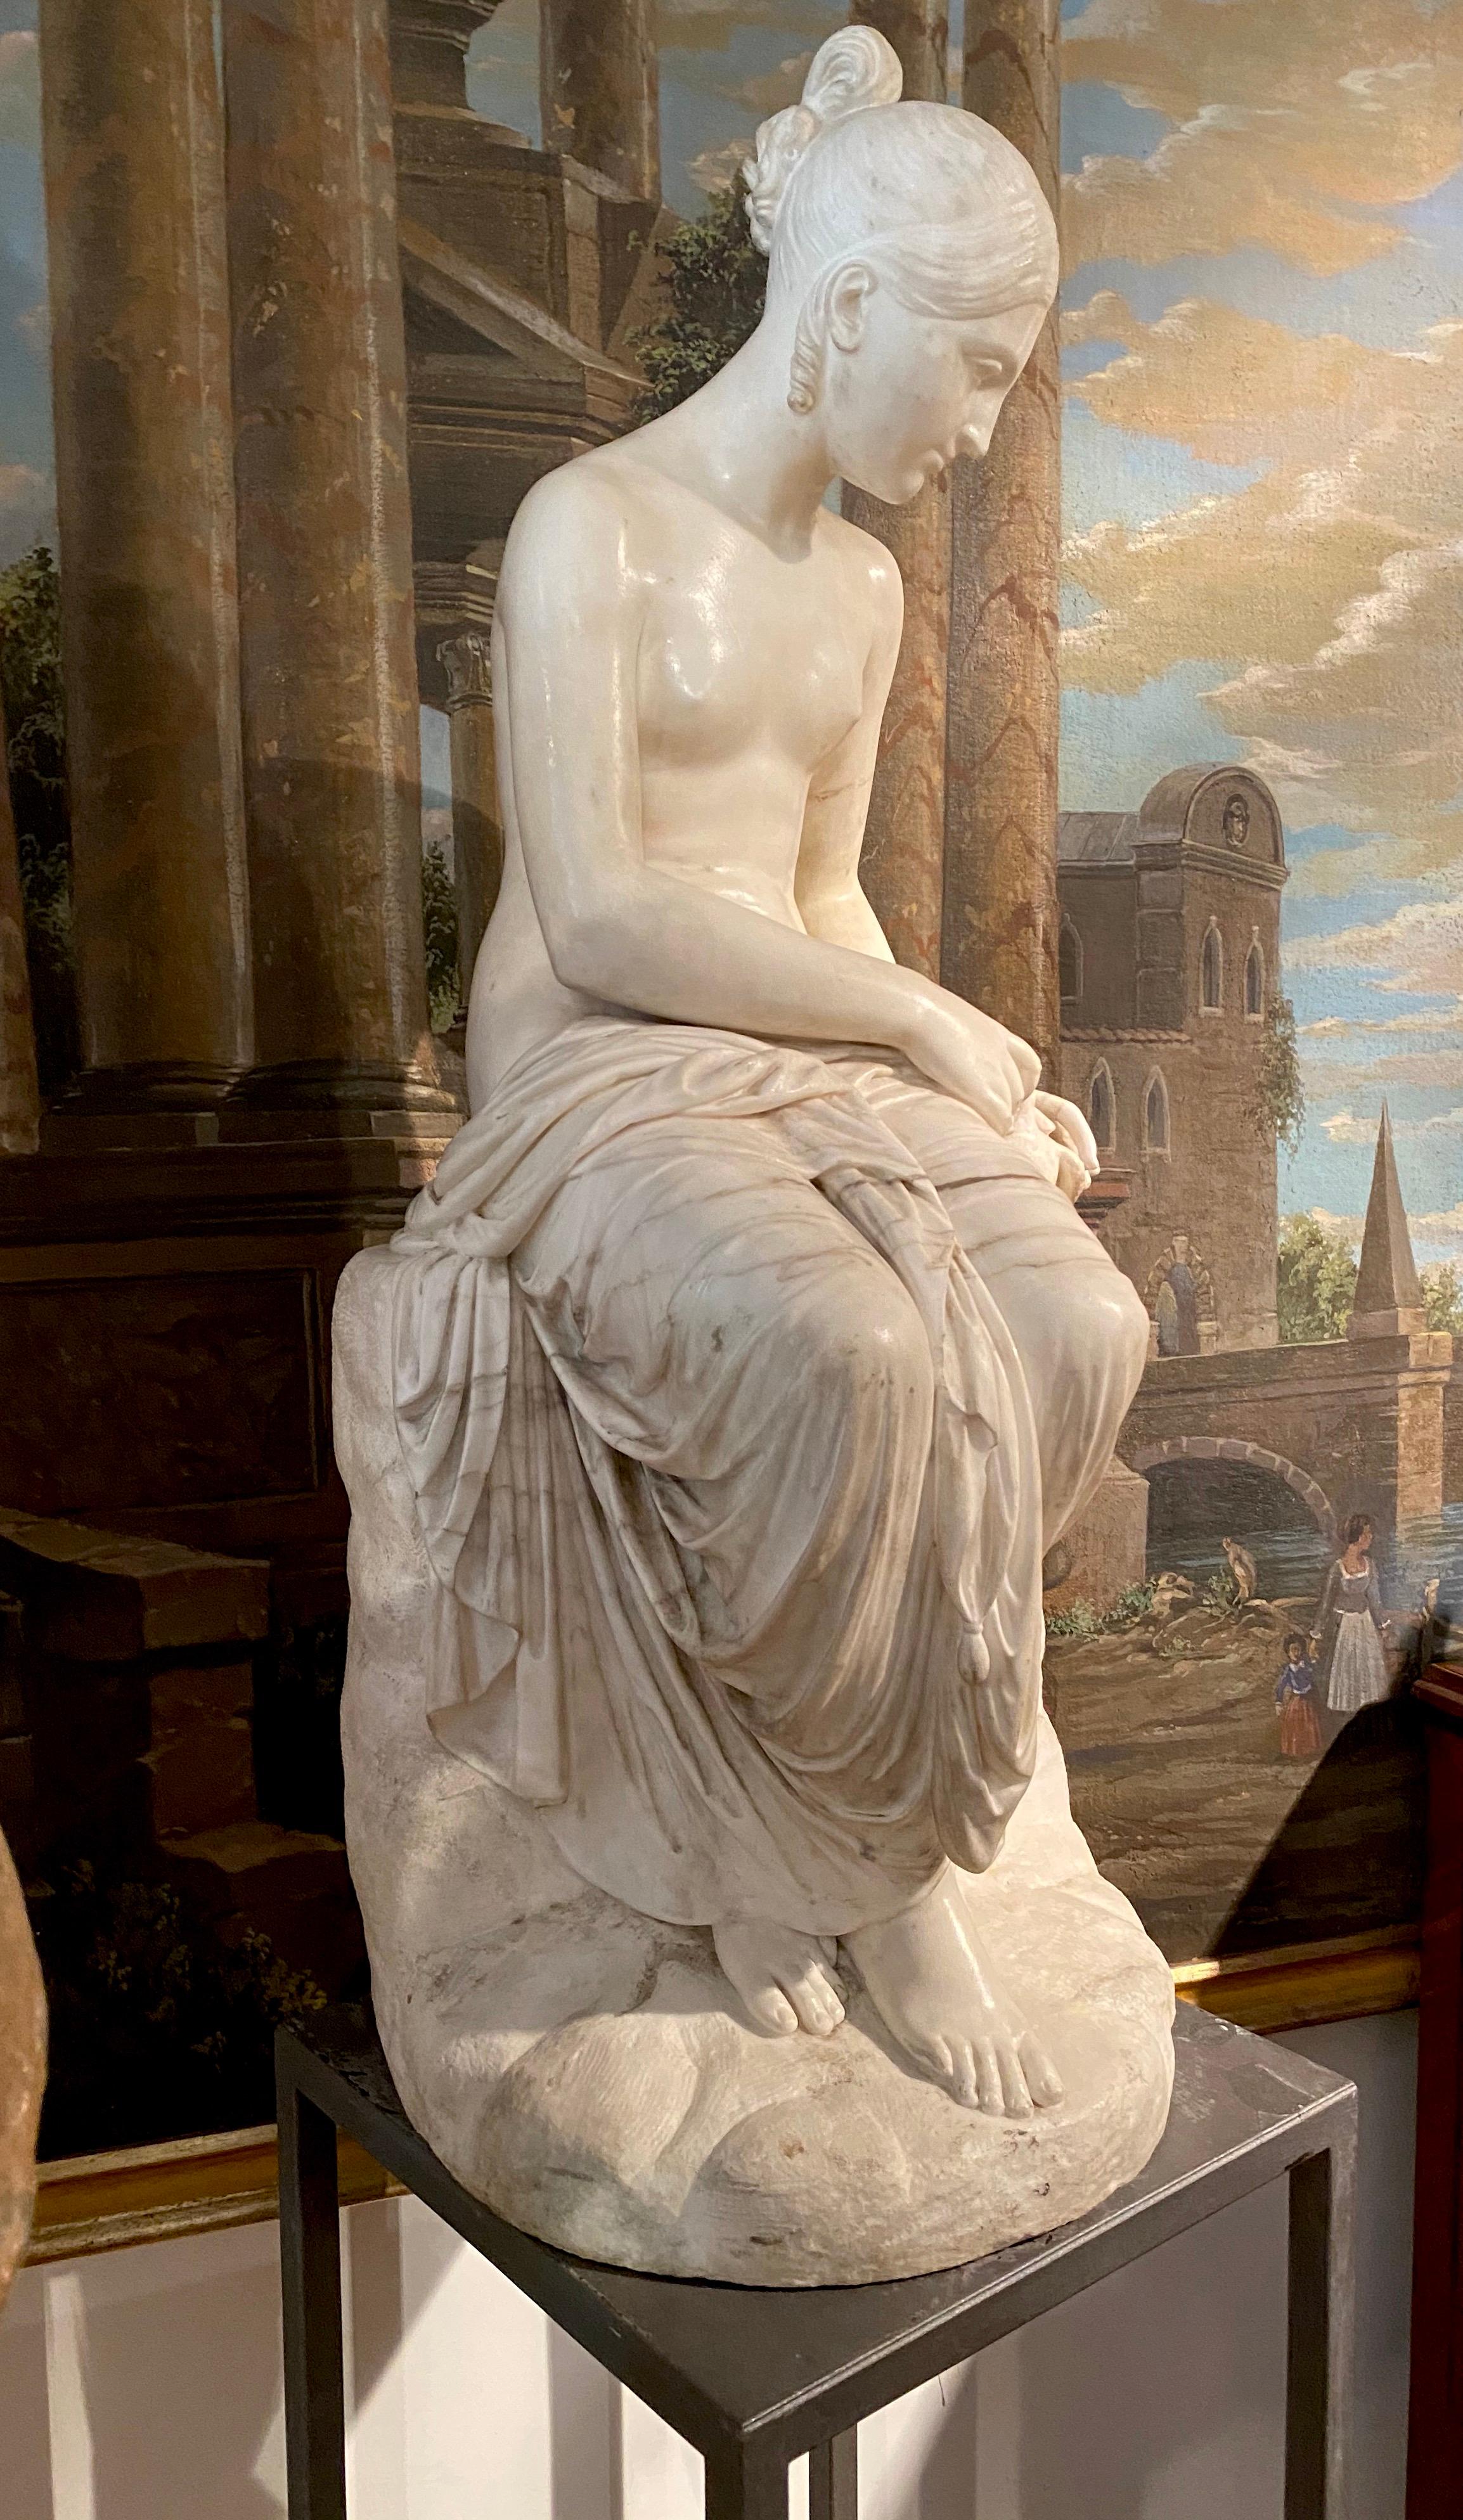 Amazing neoclassical white marble sculpture of seated nymph feeding a dove .
The neoclassical composition also incorporates drapery which is used to conceal her nudity. The turn of the neck, but leans slightly forward, adding greater finesse to the